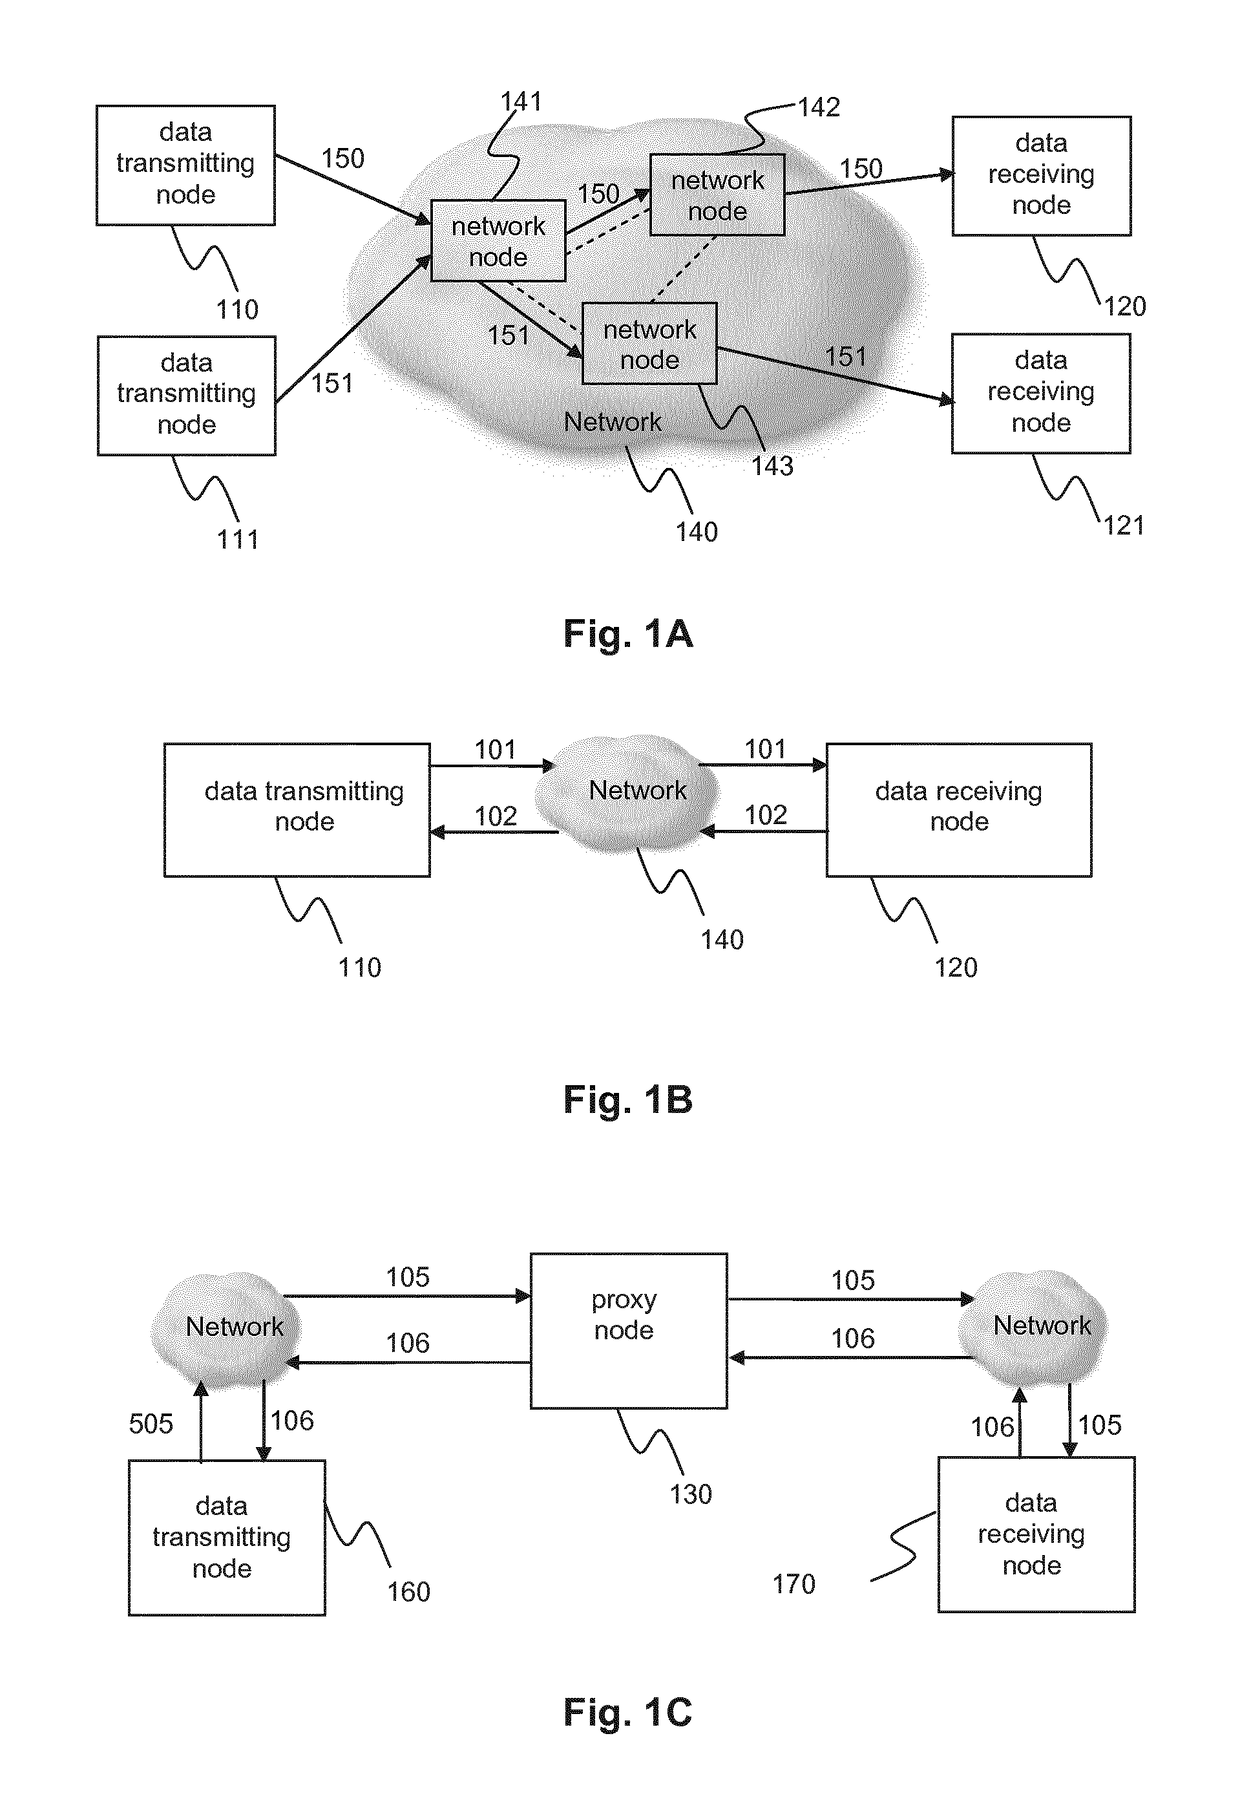 Method and Apparatus for Network Congestion Control Based on Transmission Rate Gradients